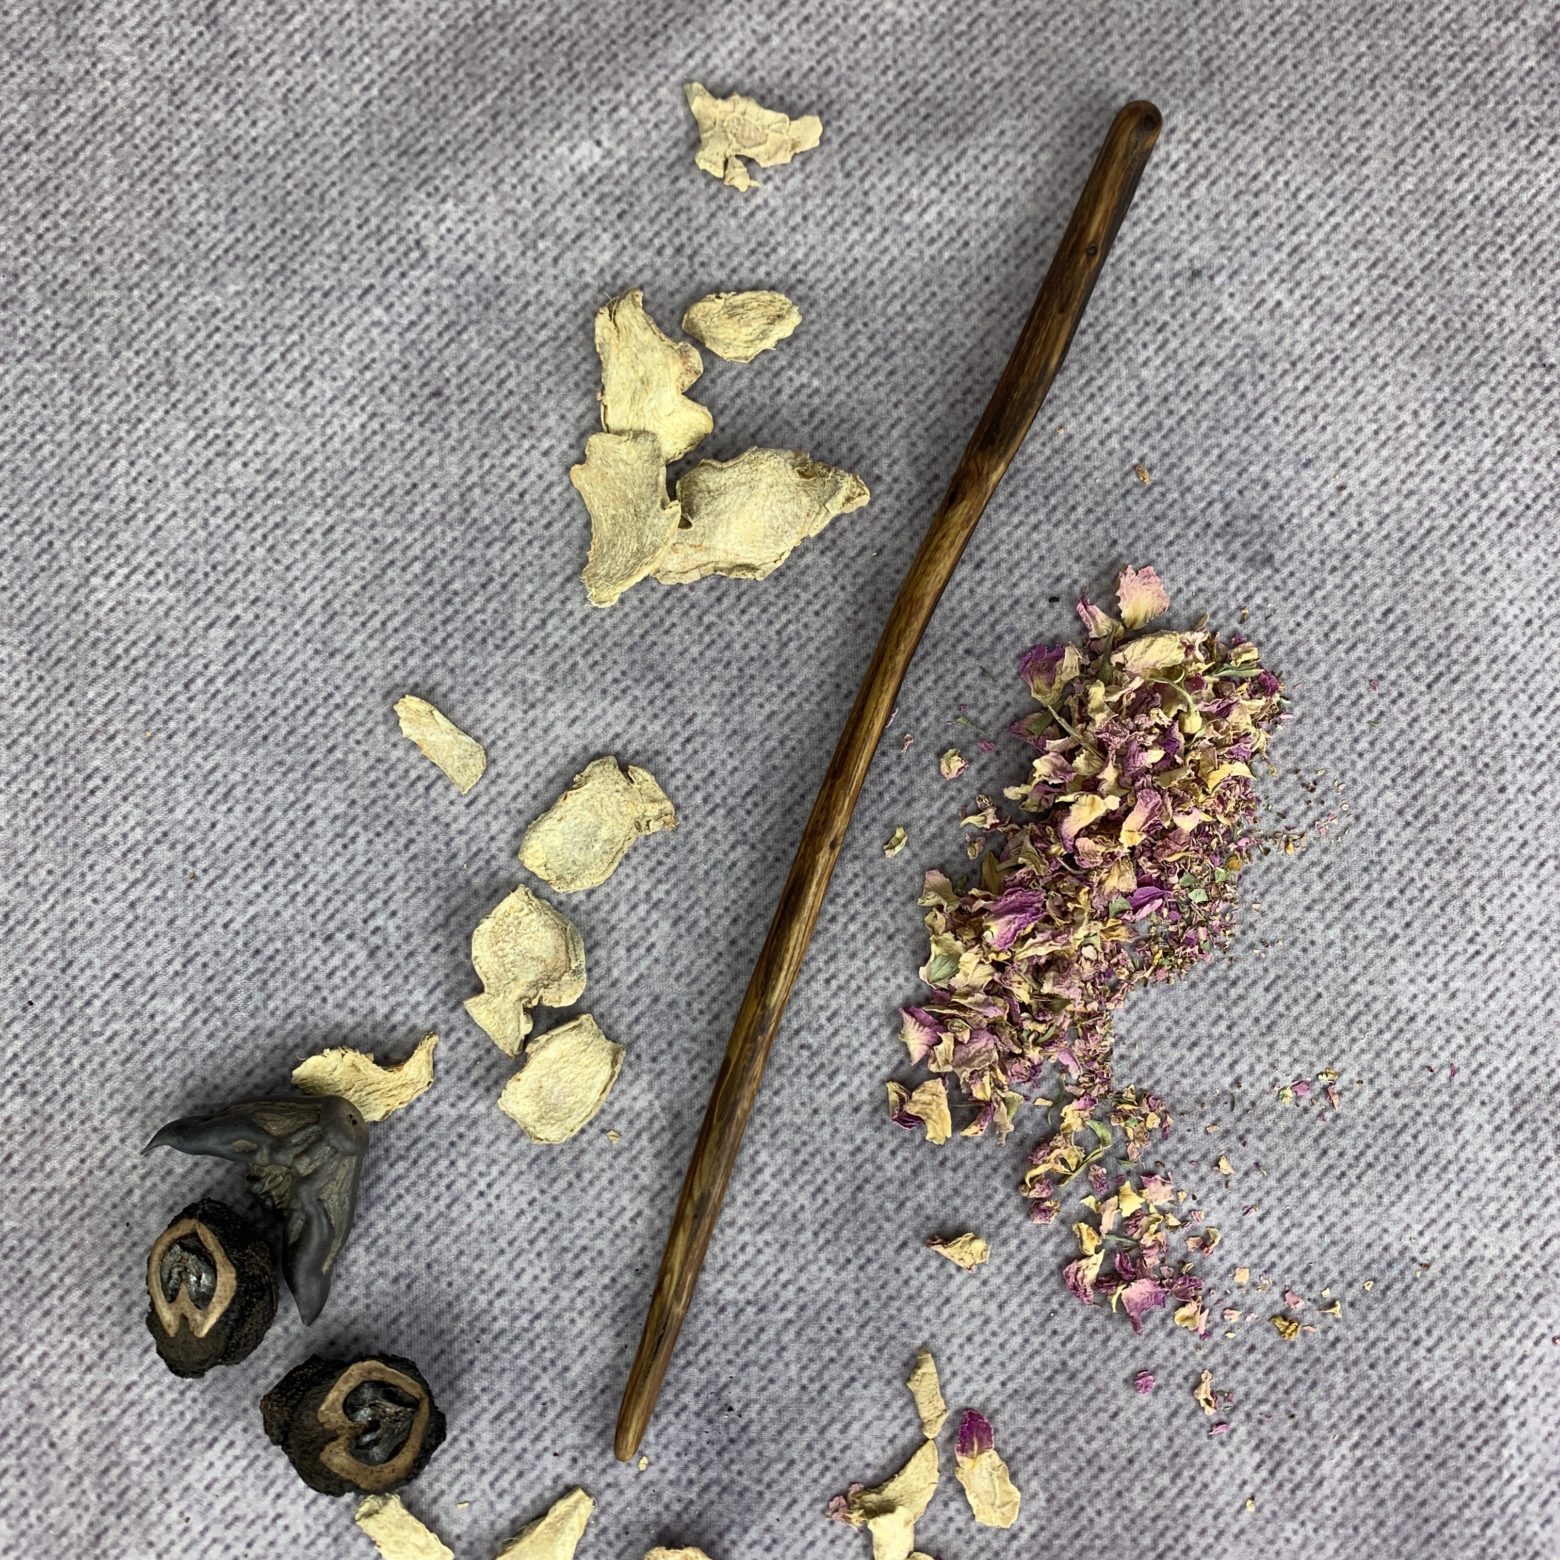 August Aquarius Full Moon Fae Wand Spell Kit and Workshop